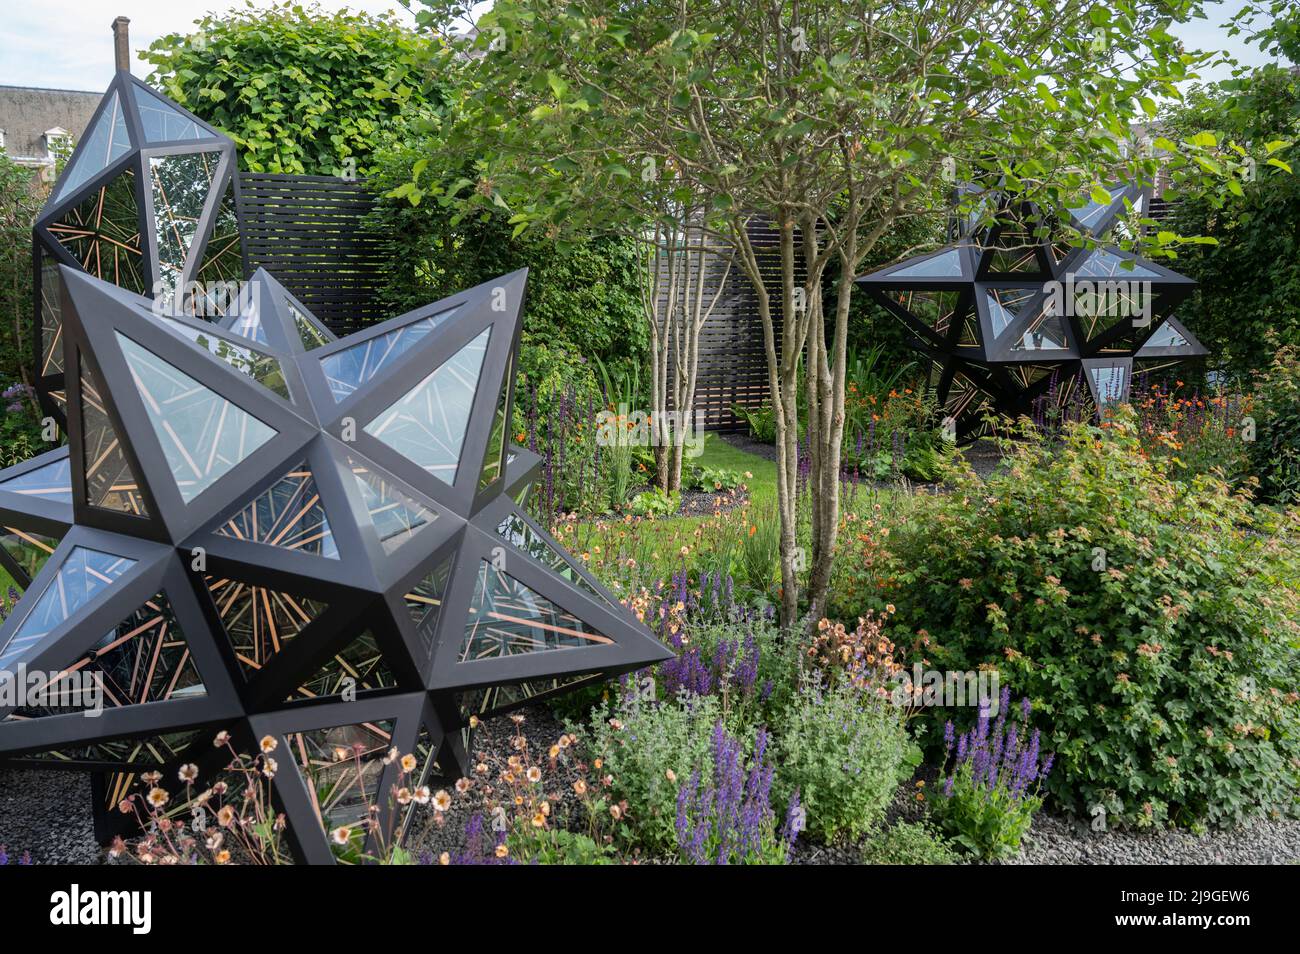 Royal Hospital, Chelsea, London, UK. 23 May 2022. The RHS Chelsea Flower show opens to the press. Saatchi Gallery Garden 281, featuring works by London-born artist Anthony James. Credit: Malcolm Park/Alamy Live News Stock Photo